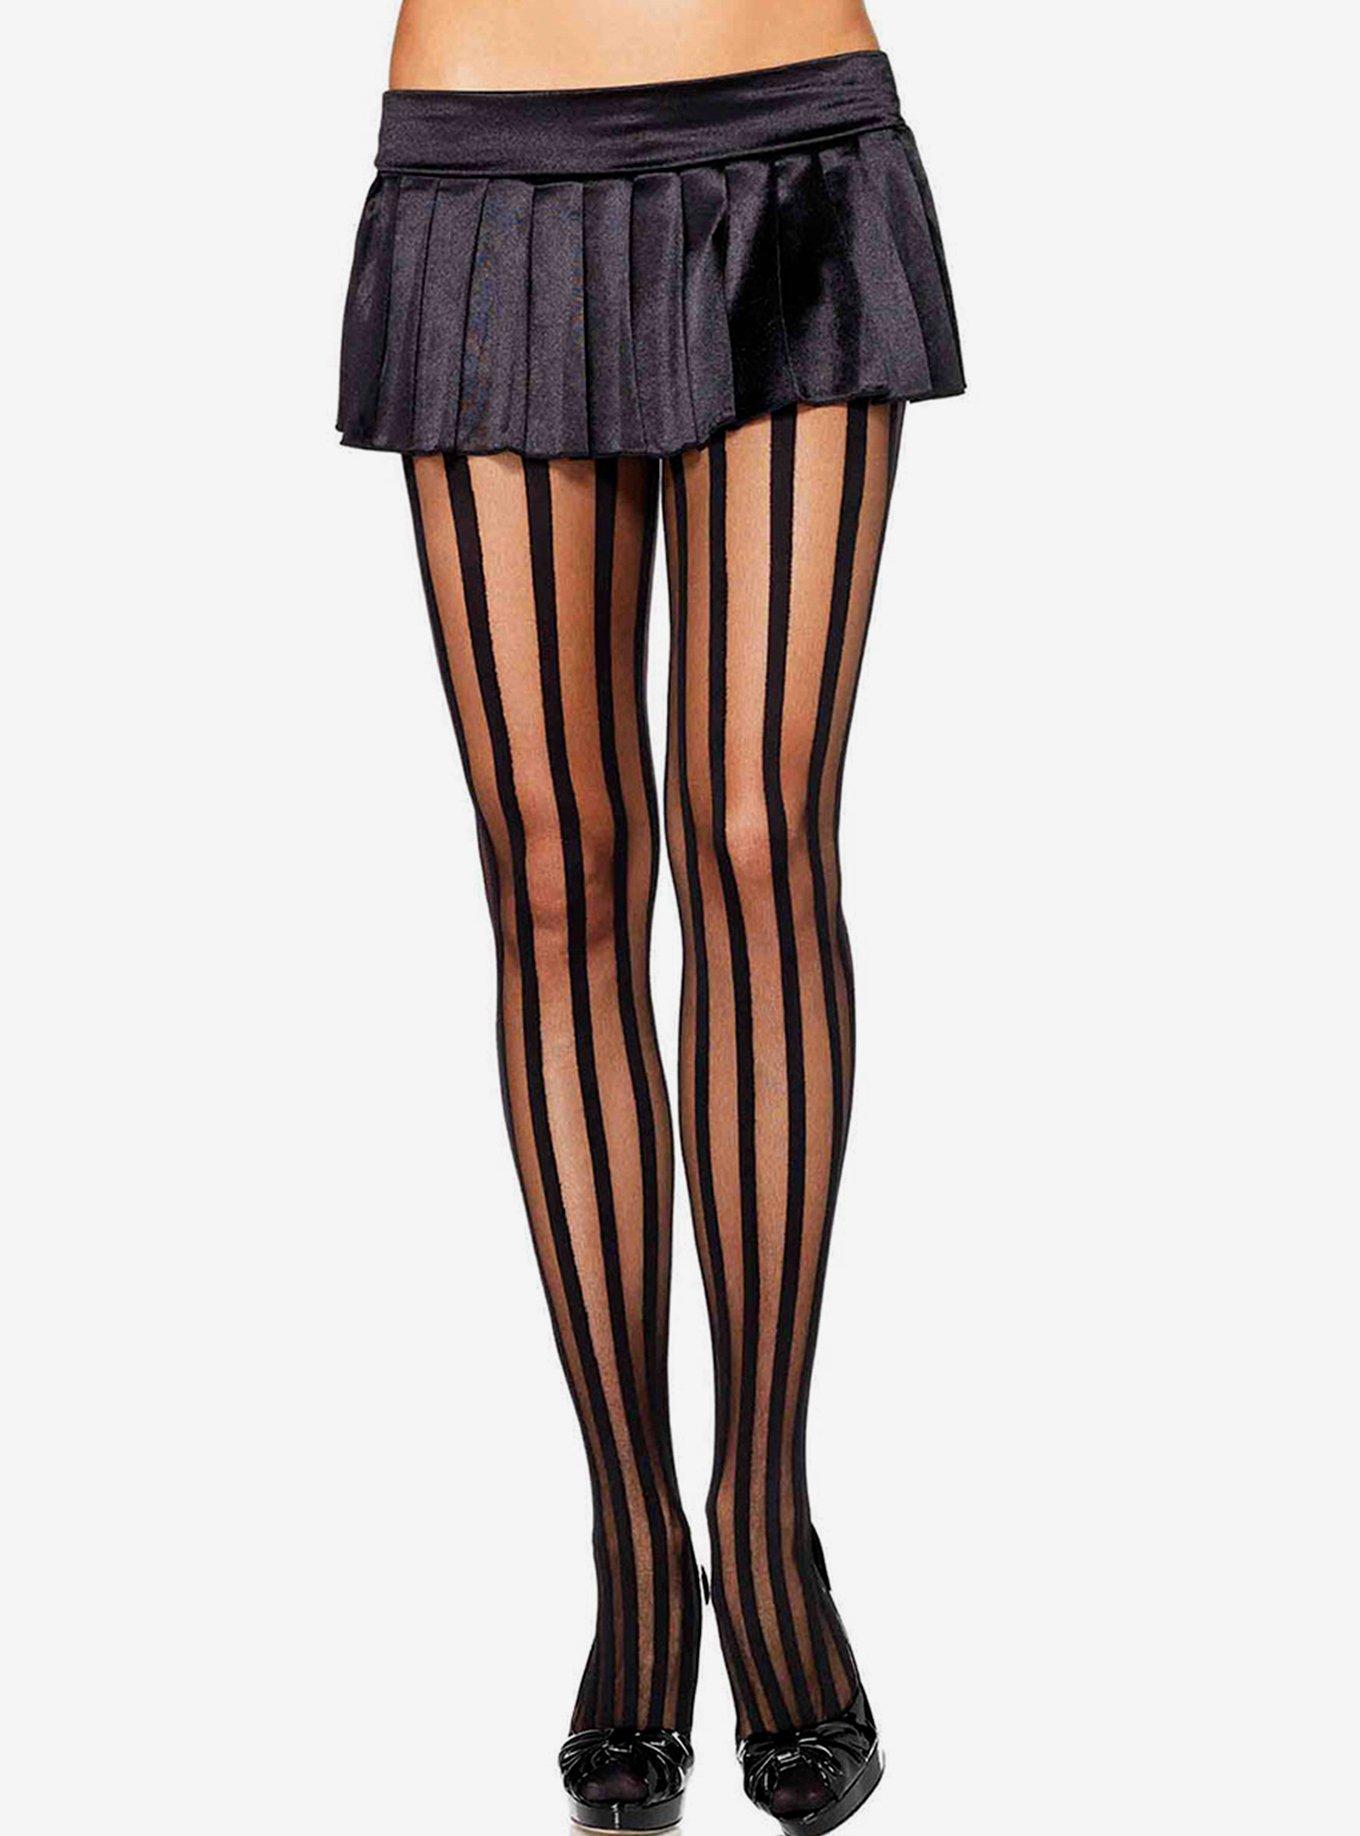 Hot Topic Vertical Striped Tights | CoolSprings Galleria